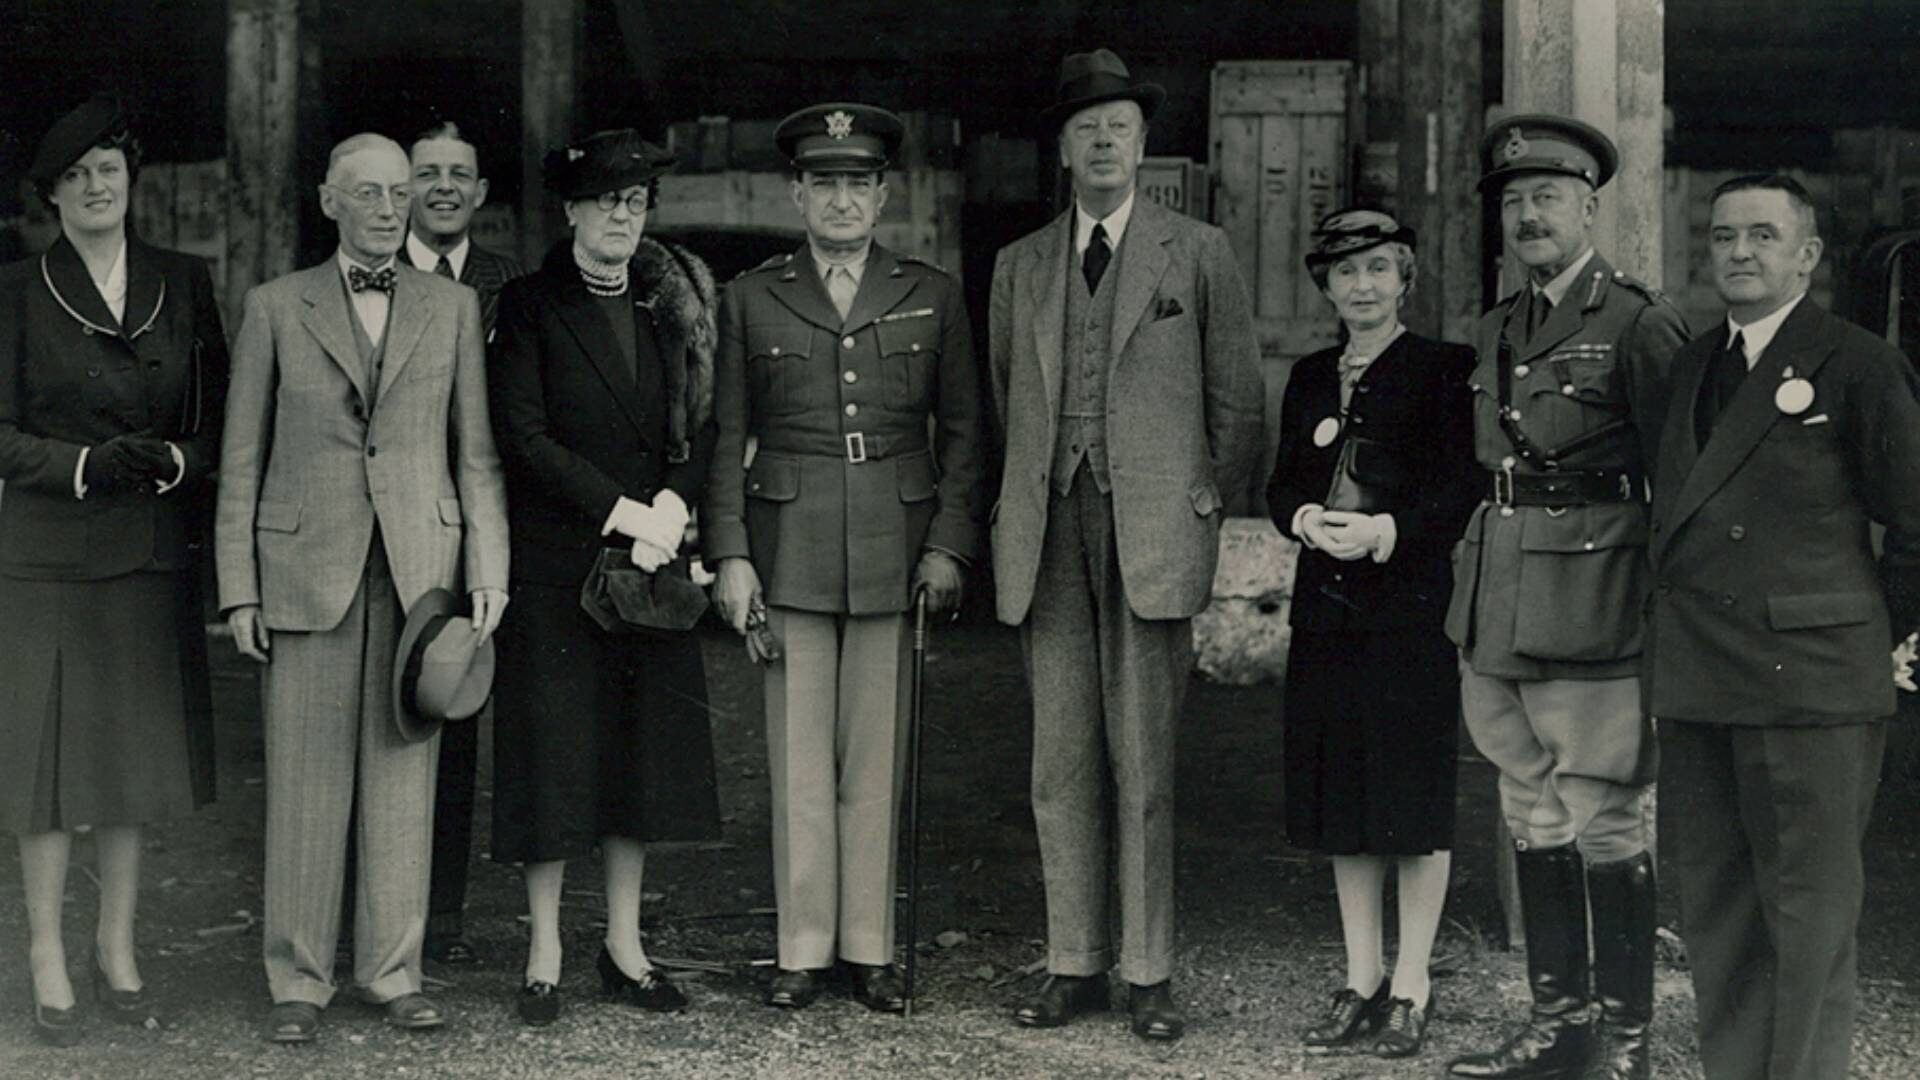 Major General Russell P. Hartle of the United States Army with the Duke and Duchess of Abercorn (Governor of Northern Ireland) and other senior politicians in Northern Ireland.